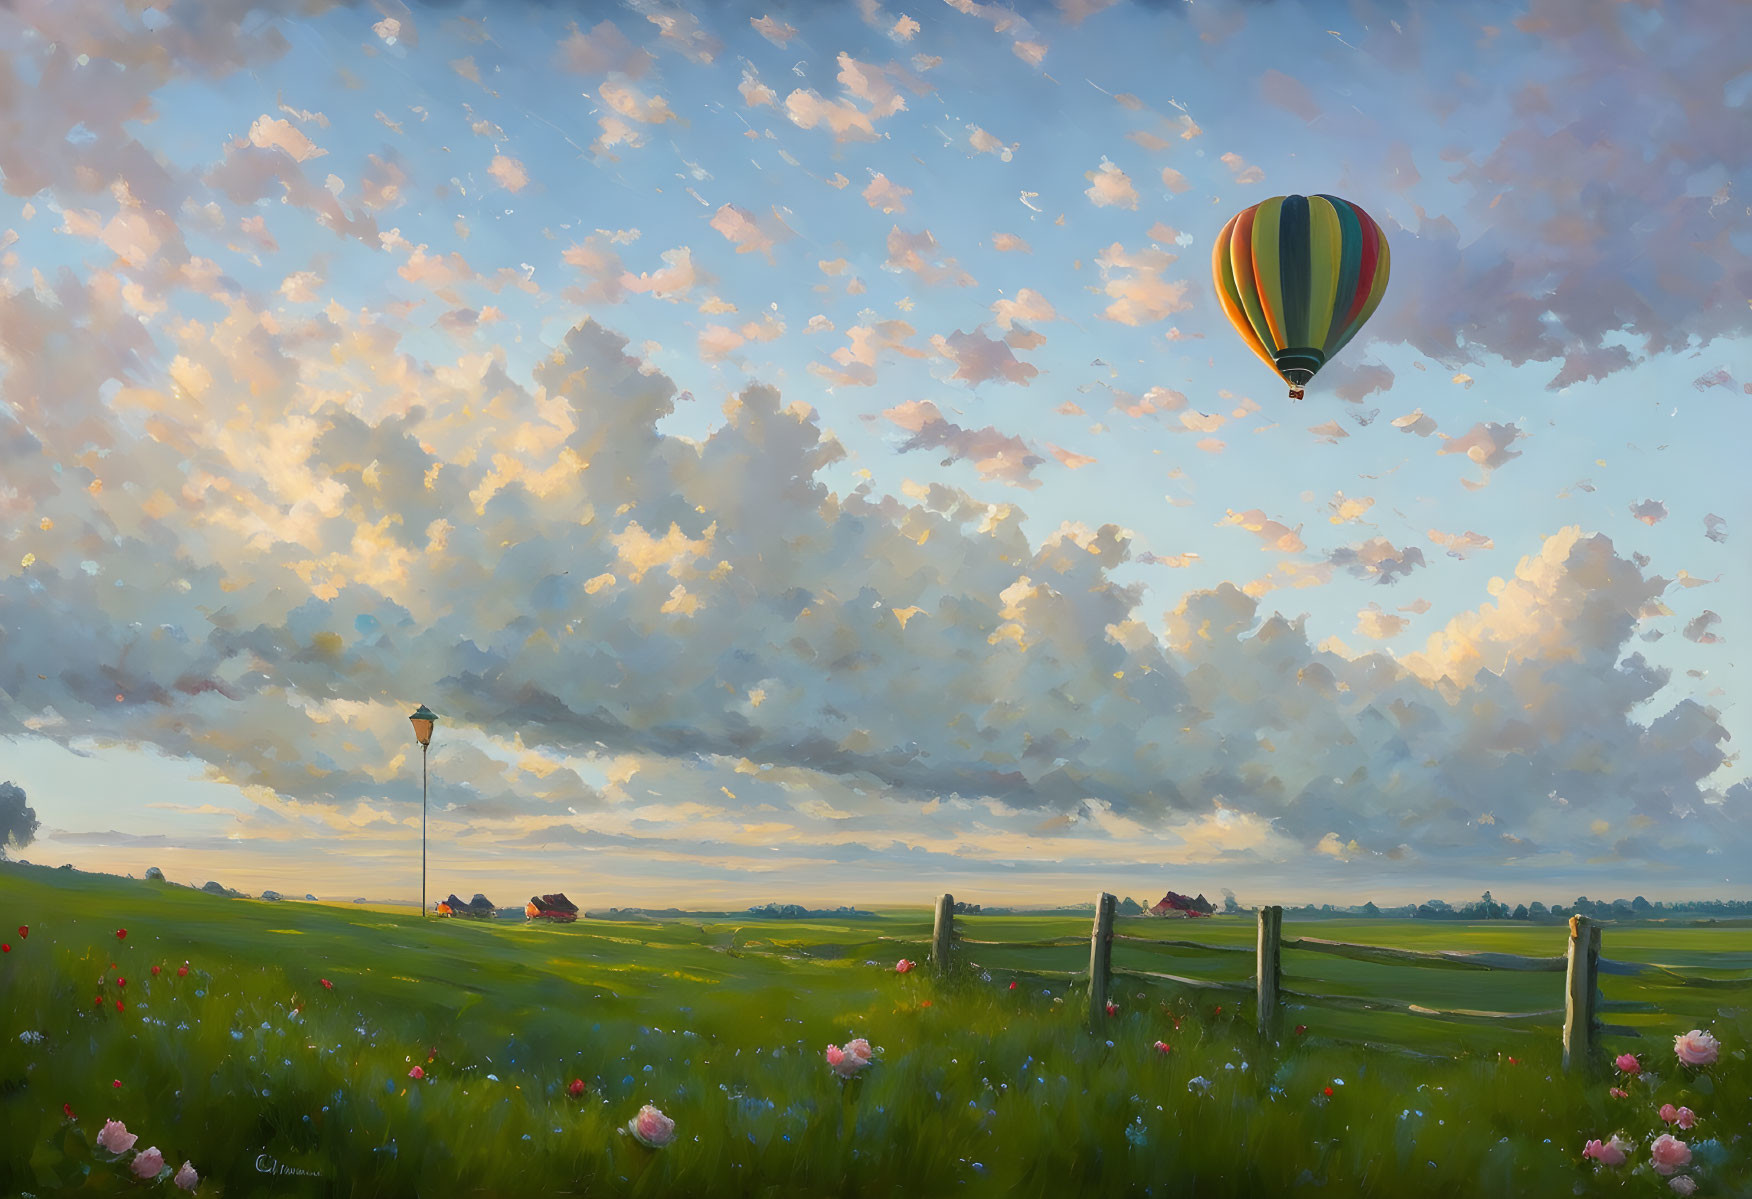 Tranquil landscape with hot air balloon over green field at sunset